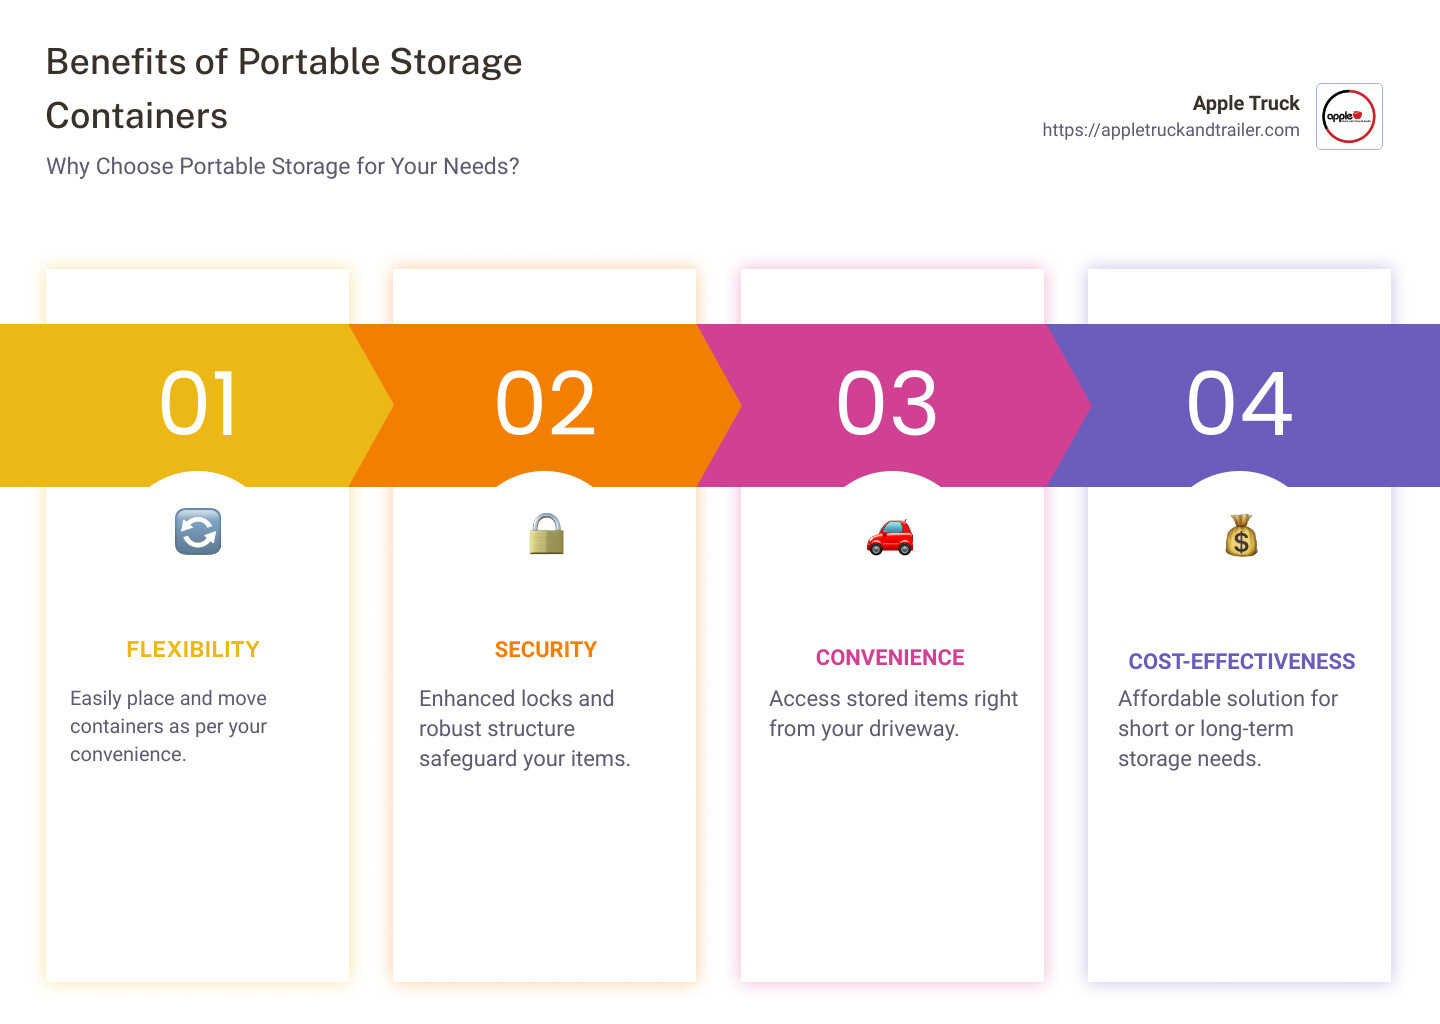 Benefits of portable storage containers: flexibility, security, convenience, cost-effectiveness - moving and storage - portable storage container rentals infographic pillar-4-steps